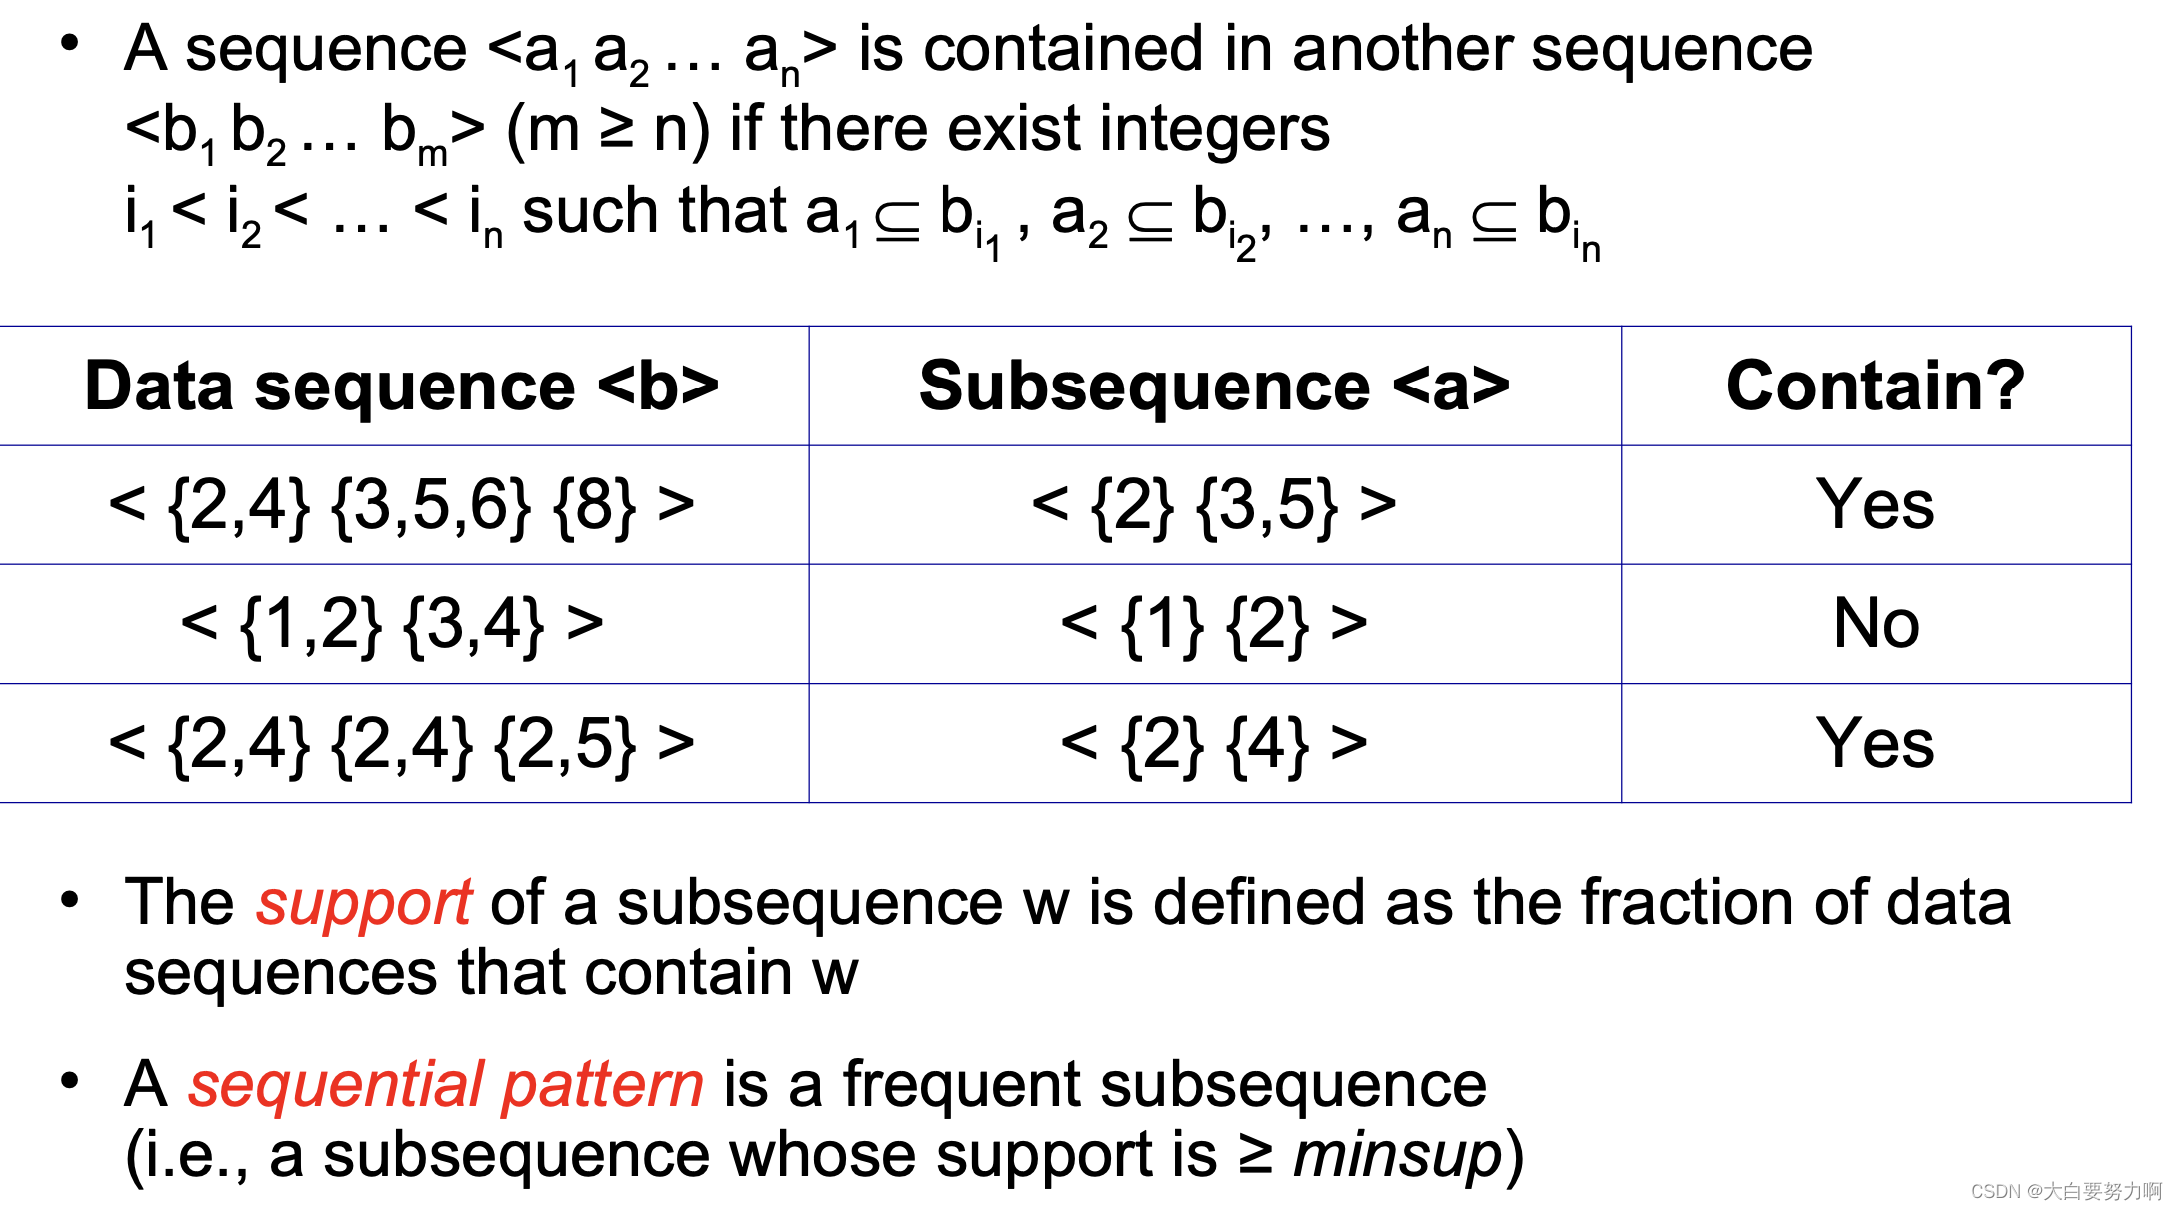 Formal Definition of a Subsequence